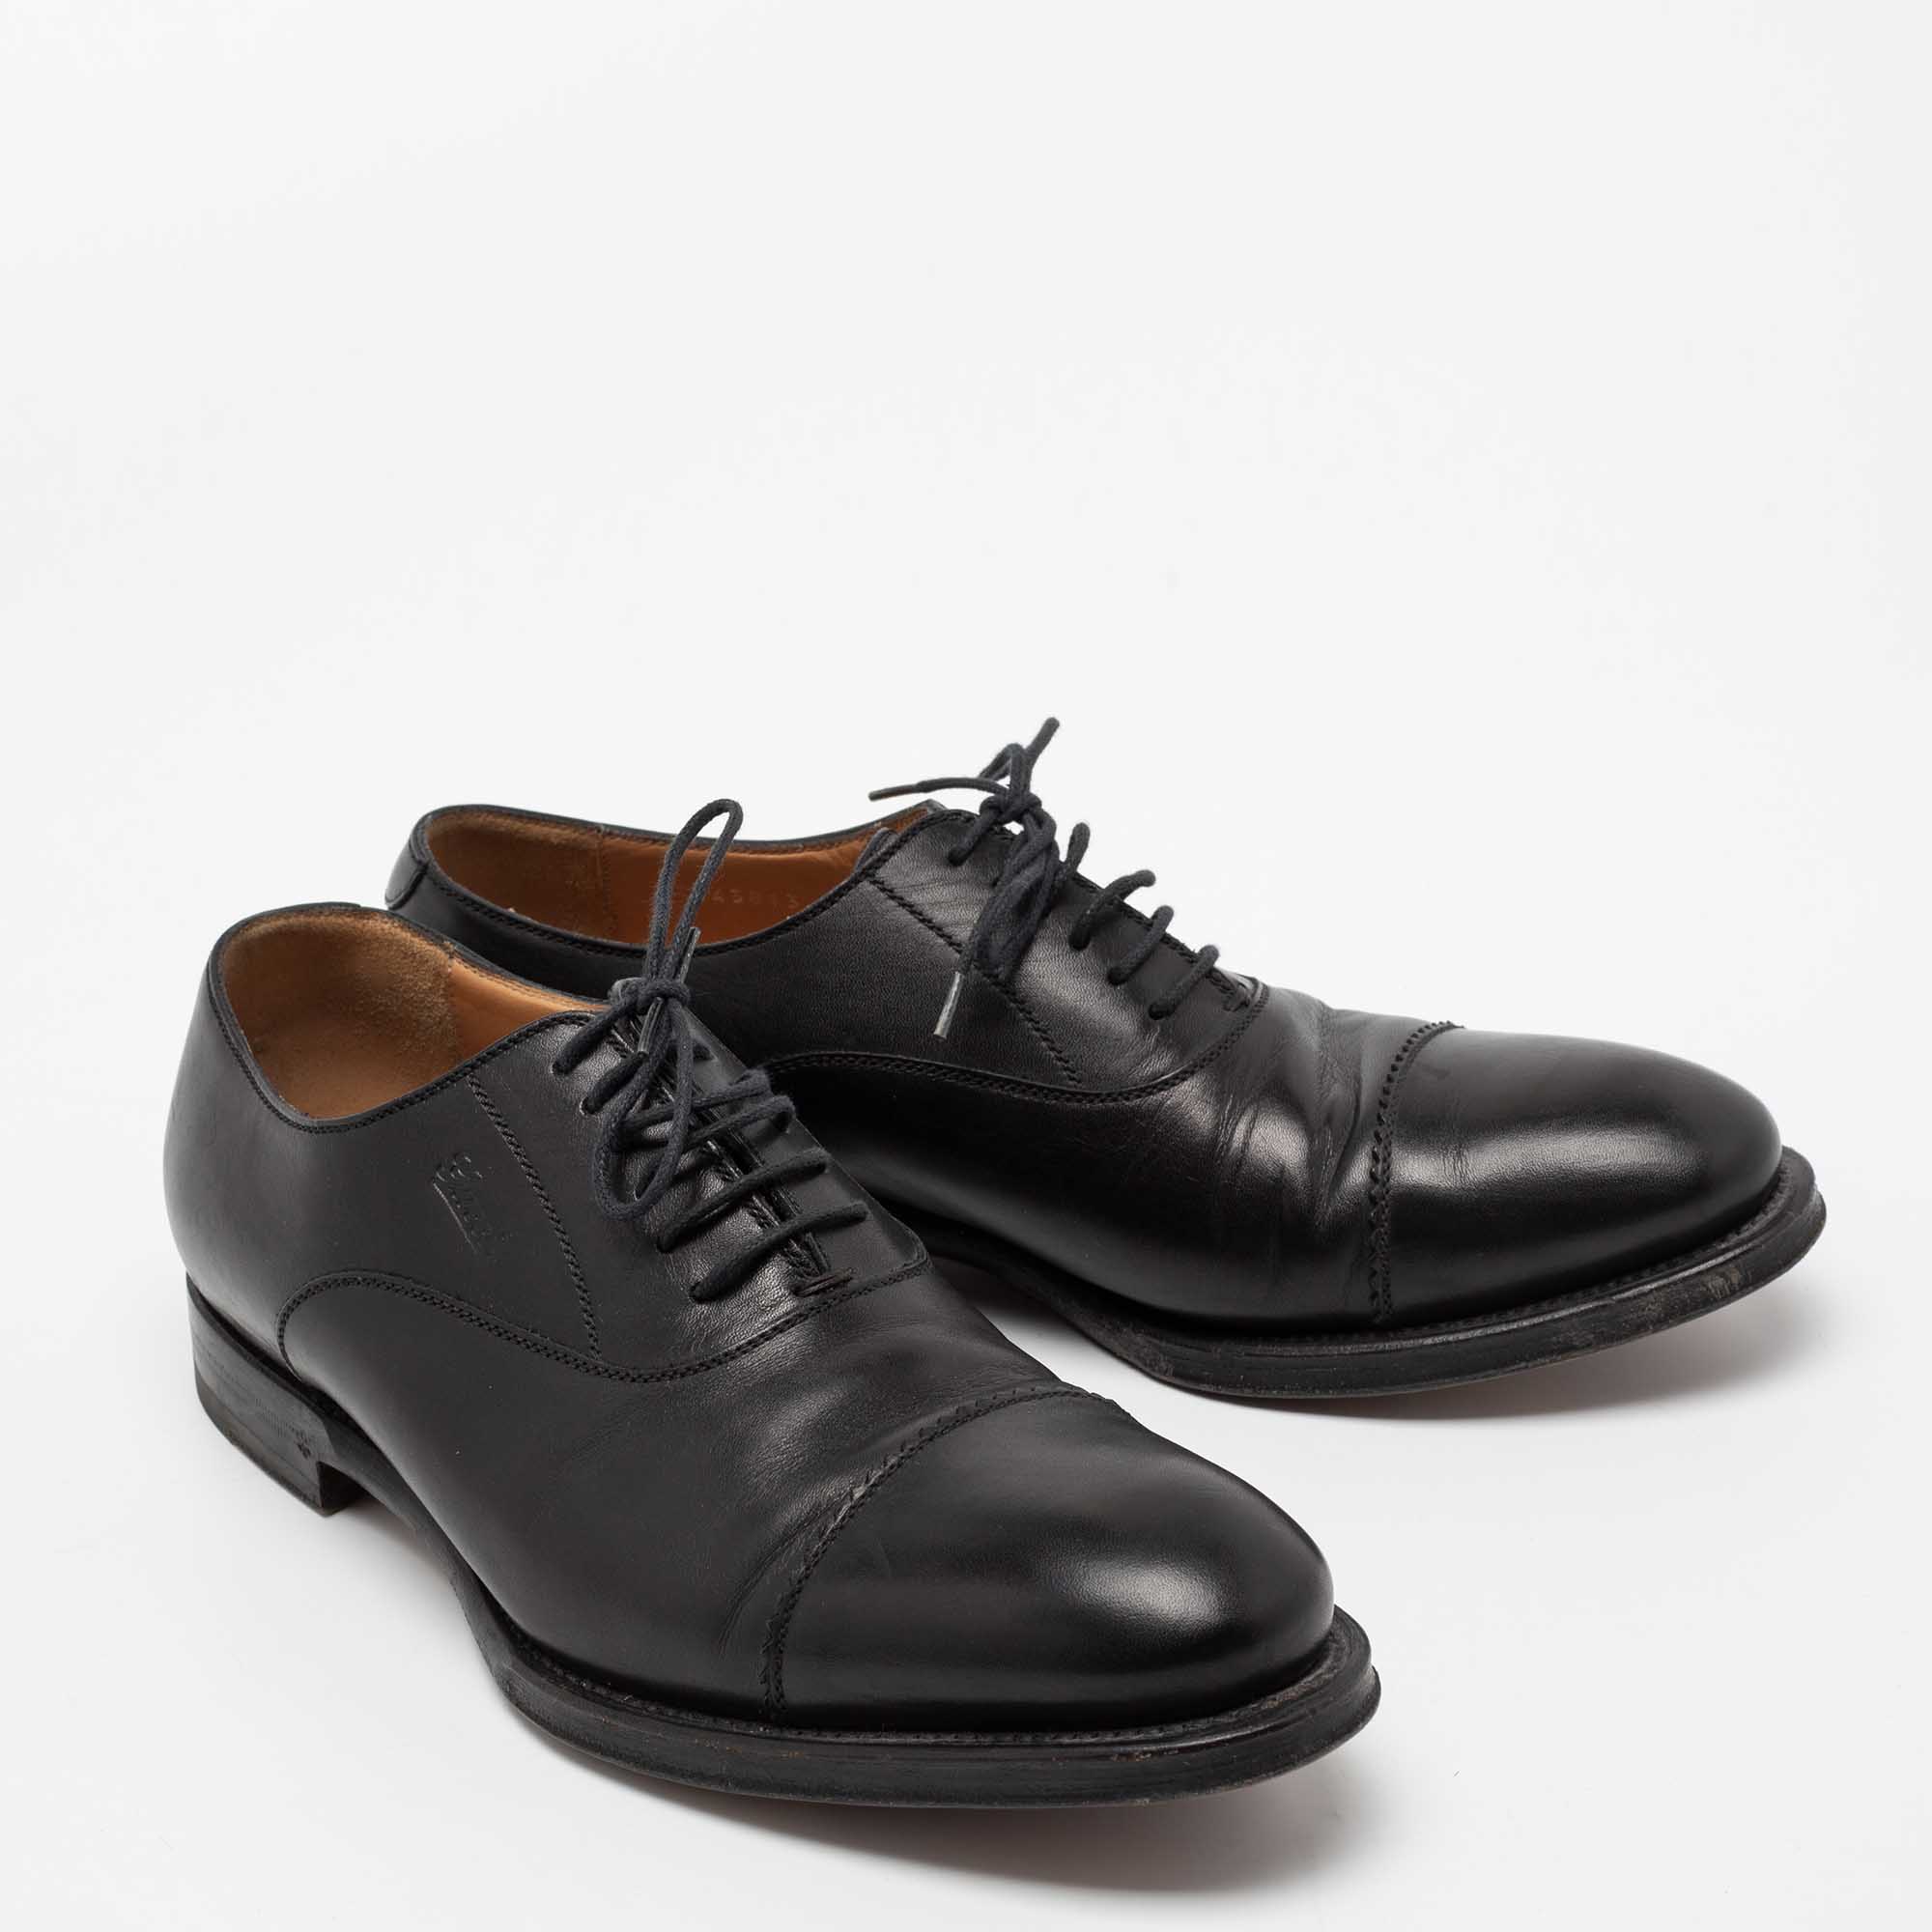 Gucci Black Leather Lace-Up Oxfords Size 40.5